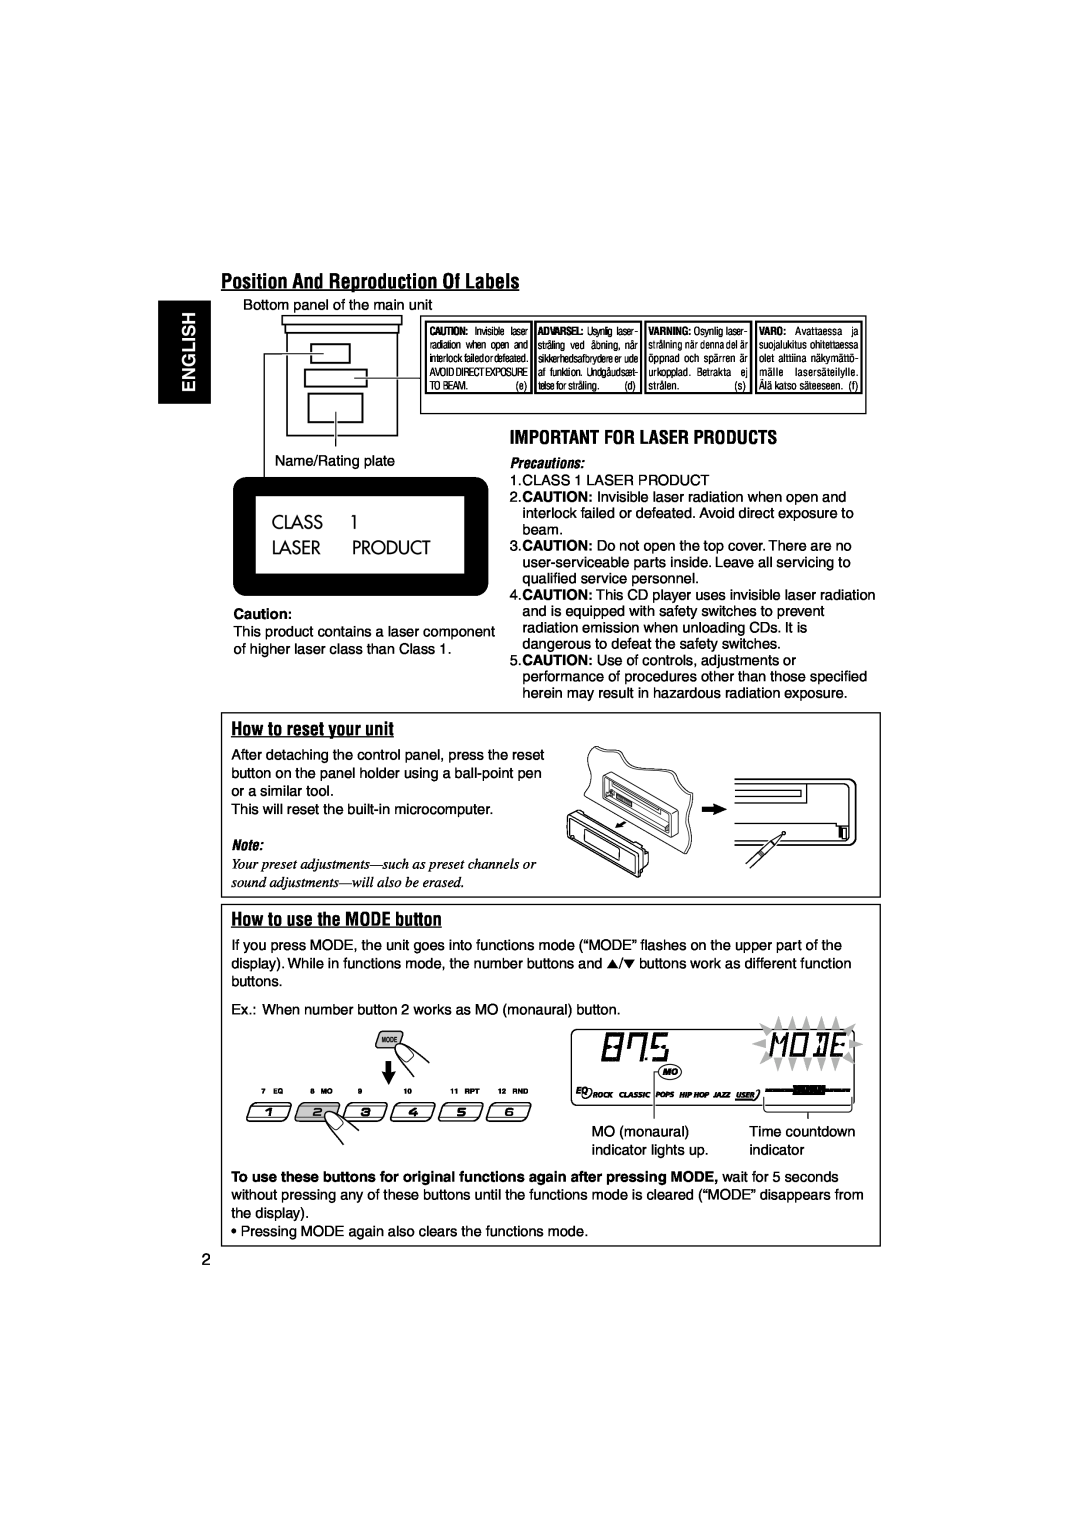 JVC GET0126-001A manual Position And Reproduction Of Labels, English, Important For Laser Products, How to reset your unit 